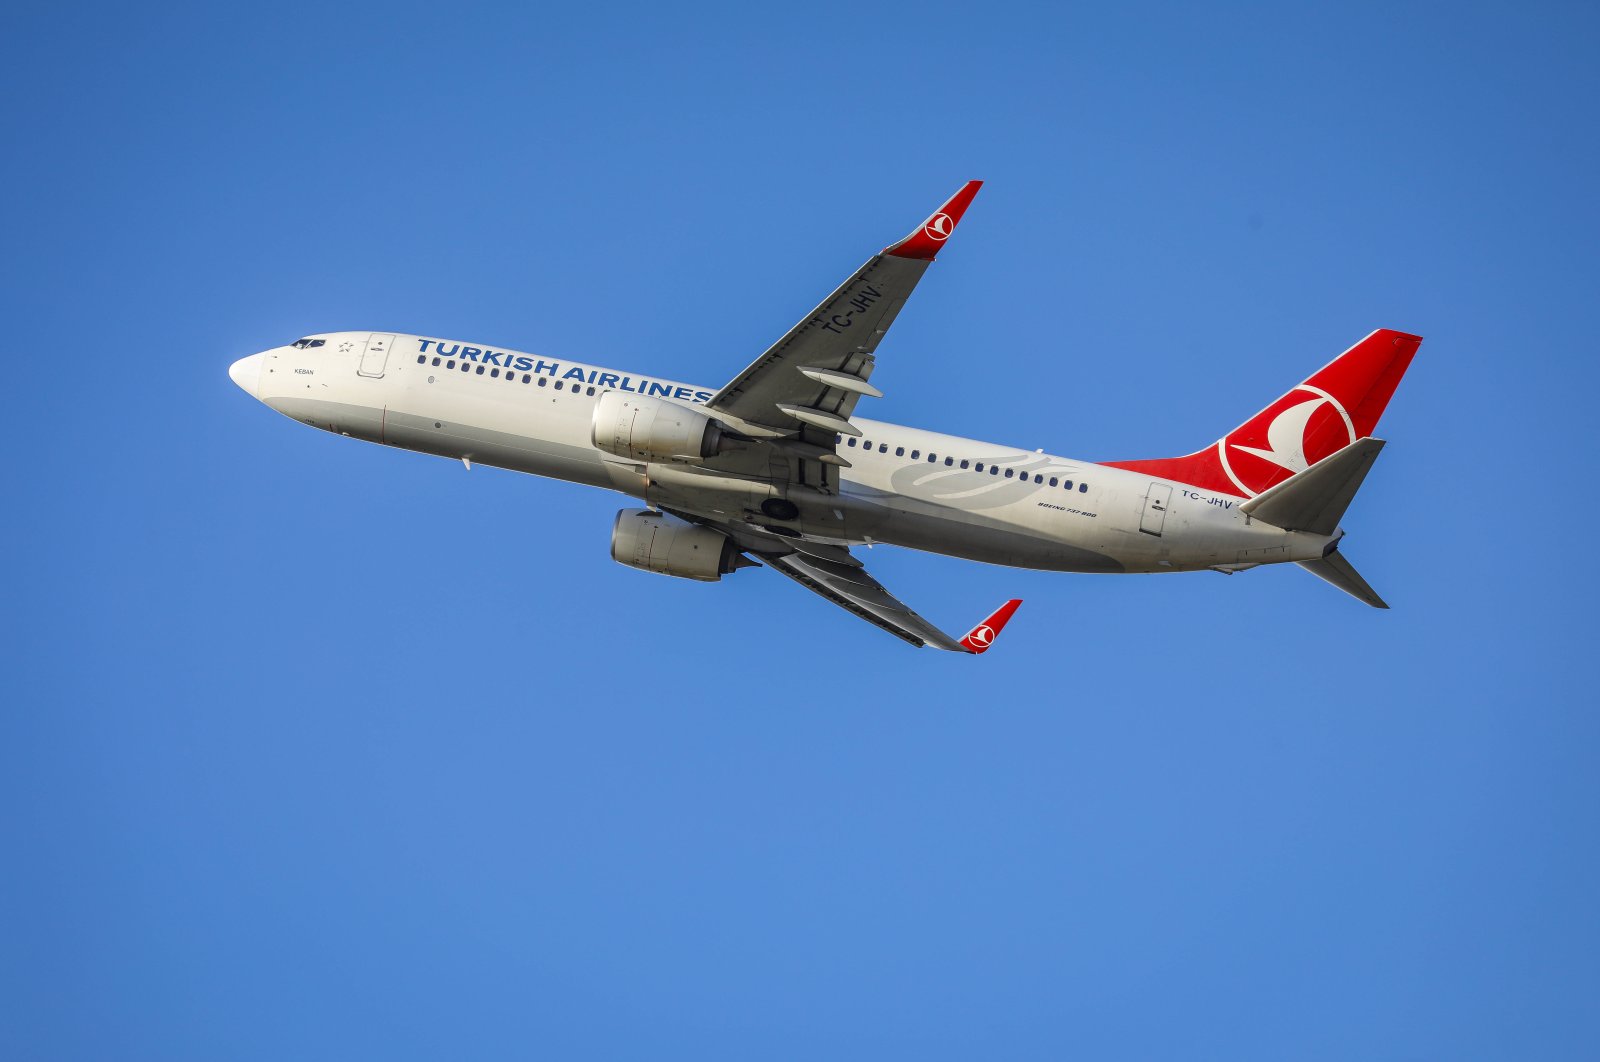 Turkish Airlines Boing 737 8F2 aircraft takes off at Düsseldorf Airport, Germany, Feb. 11, 2020. (Reuters Photo)